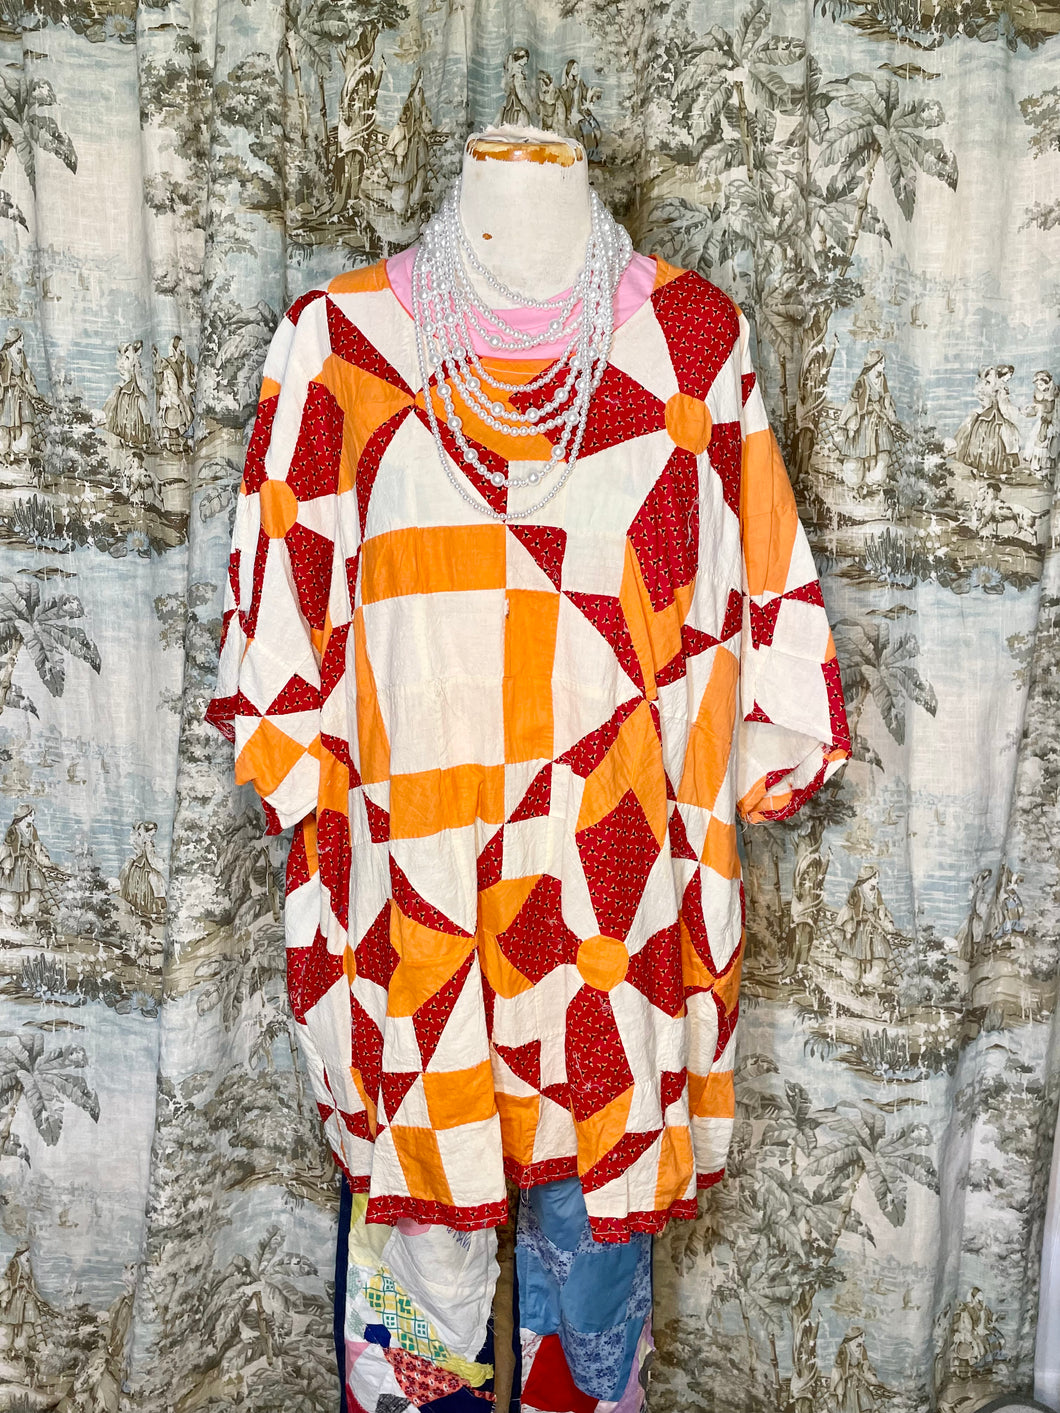 Vintage Quilt Red and Orange Tunic Top   Handmade Bohemian Gypsy Style Festival Quilt Top Vintage Patchwork Quilt Top handmade / grandmas garden quilt dress / long quilt dress Quilt Patchwork Dress / Vintage Patchwork Quilt / Farm Dress